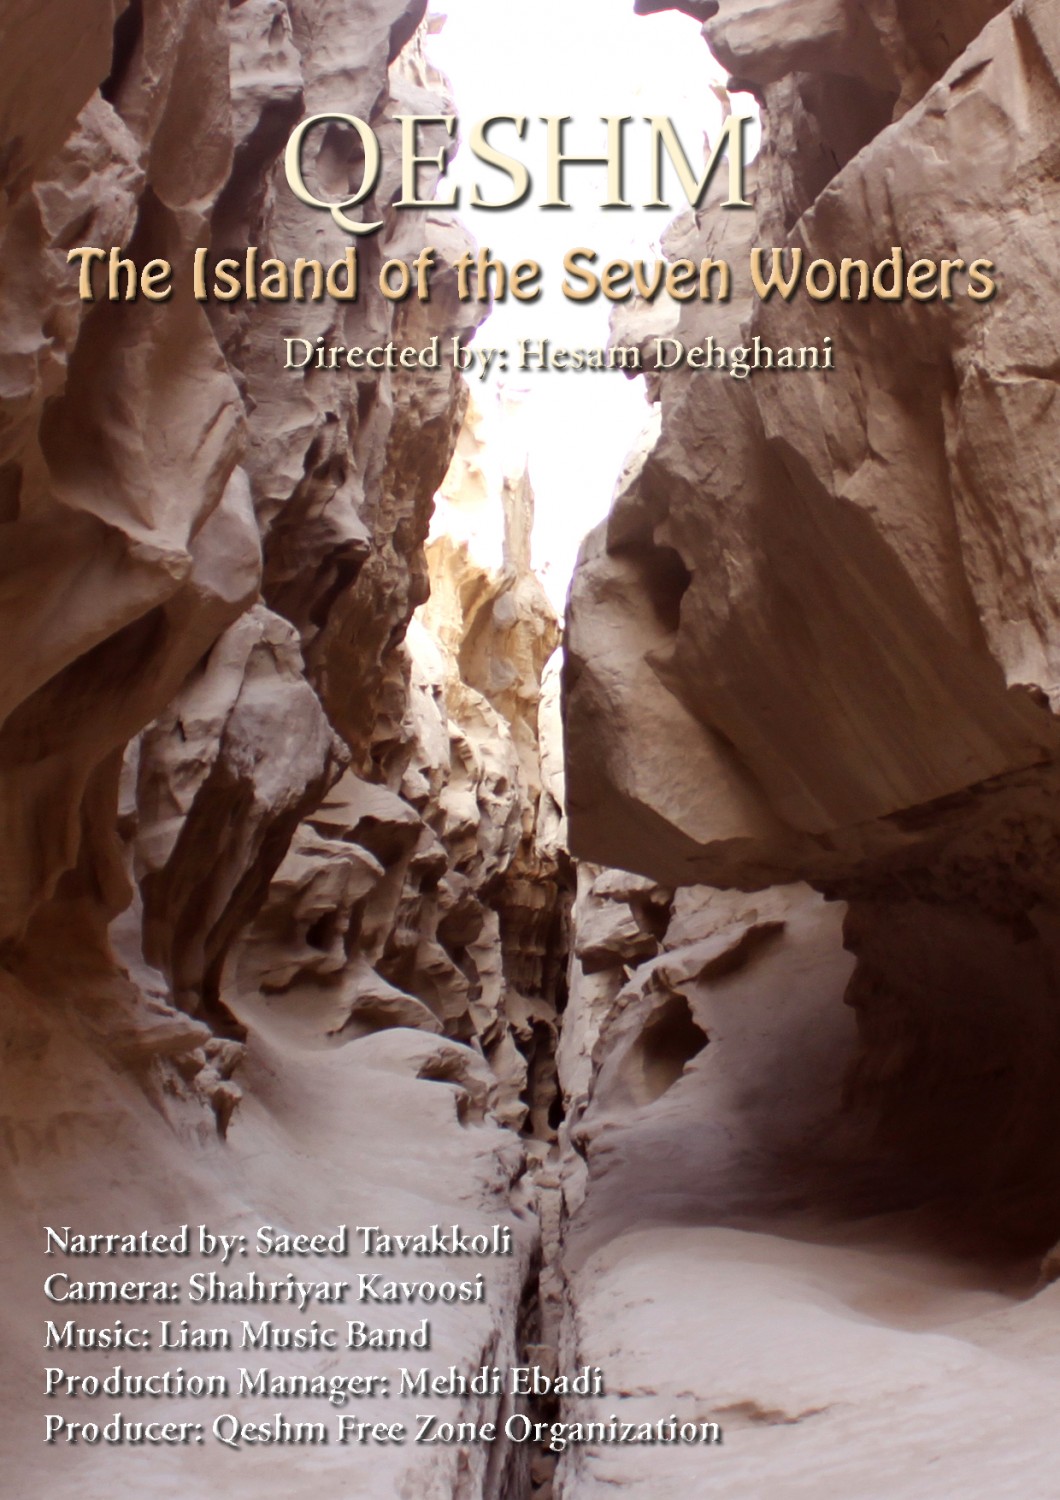 Extra Large Movie Poster Image for The Island of the Seven Wonders